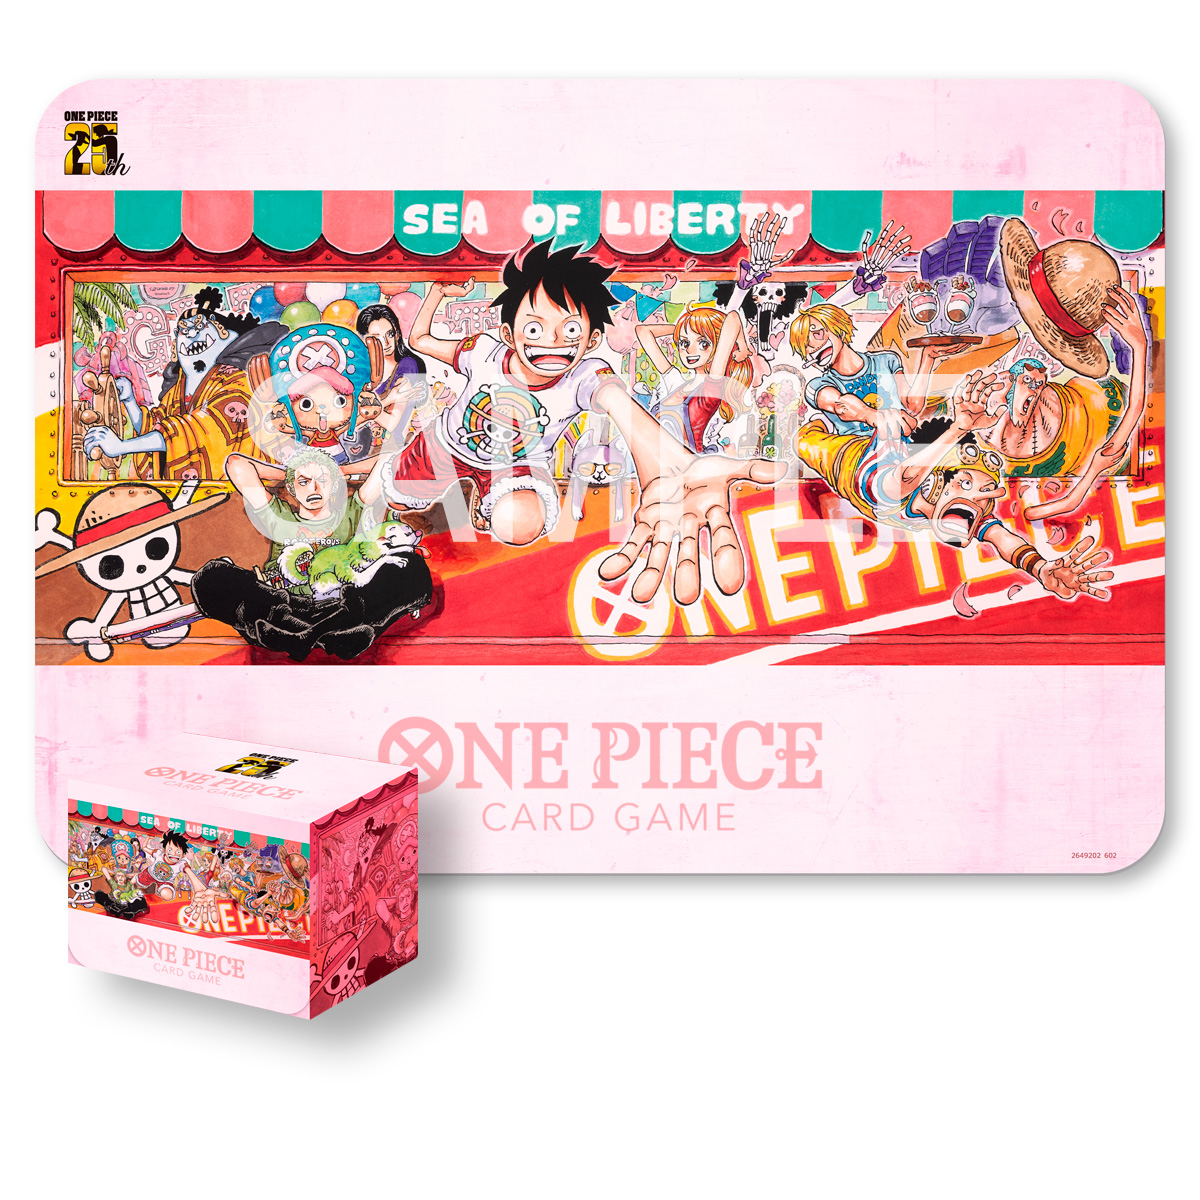 ONE PIECE CARD GAME Playmat and Card Case Set -25th Edition-